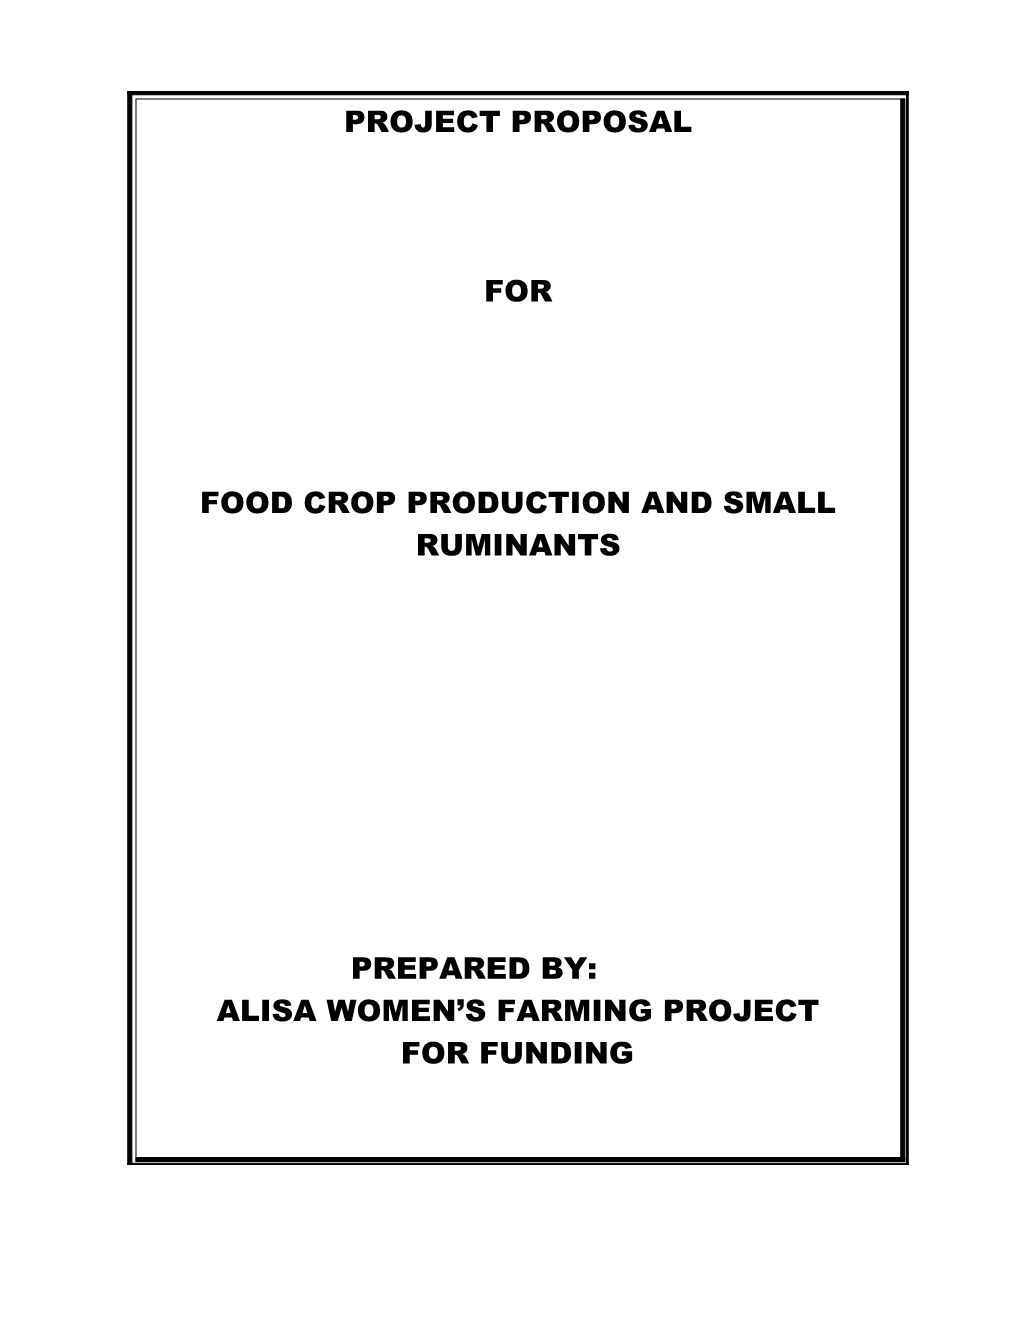 Name of Proposal - Alisa Women S Farming Project